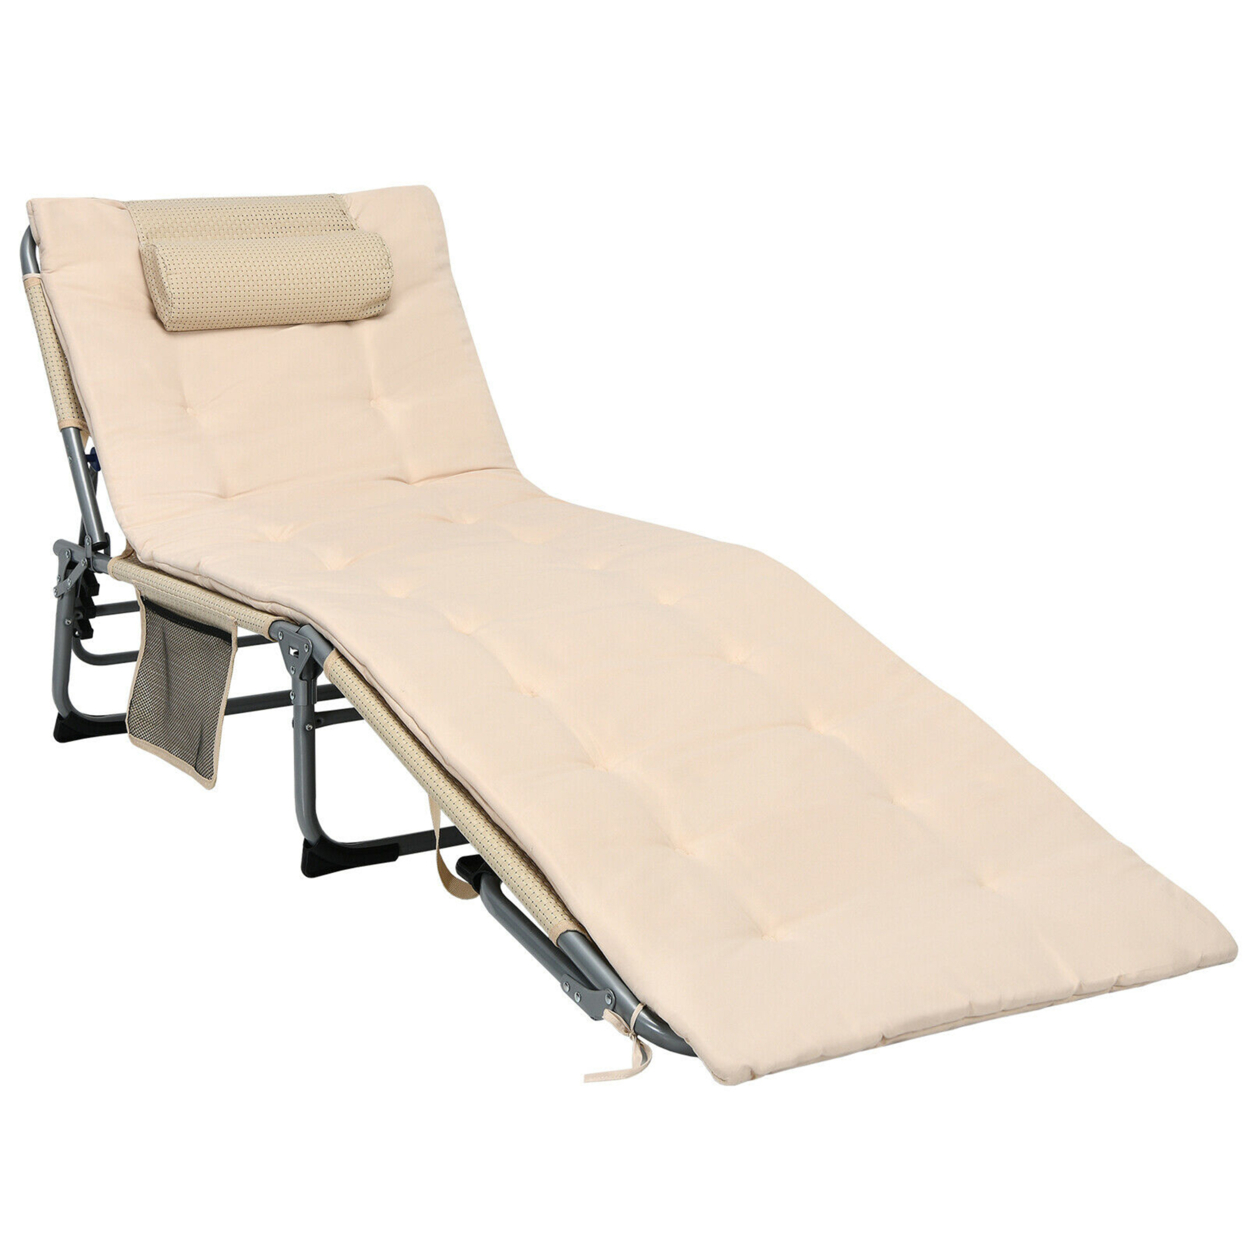 4-Fold Oversize Padded Folding Chaise Lounge Chair Reclining Chair - Beige